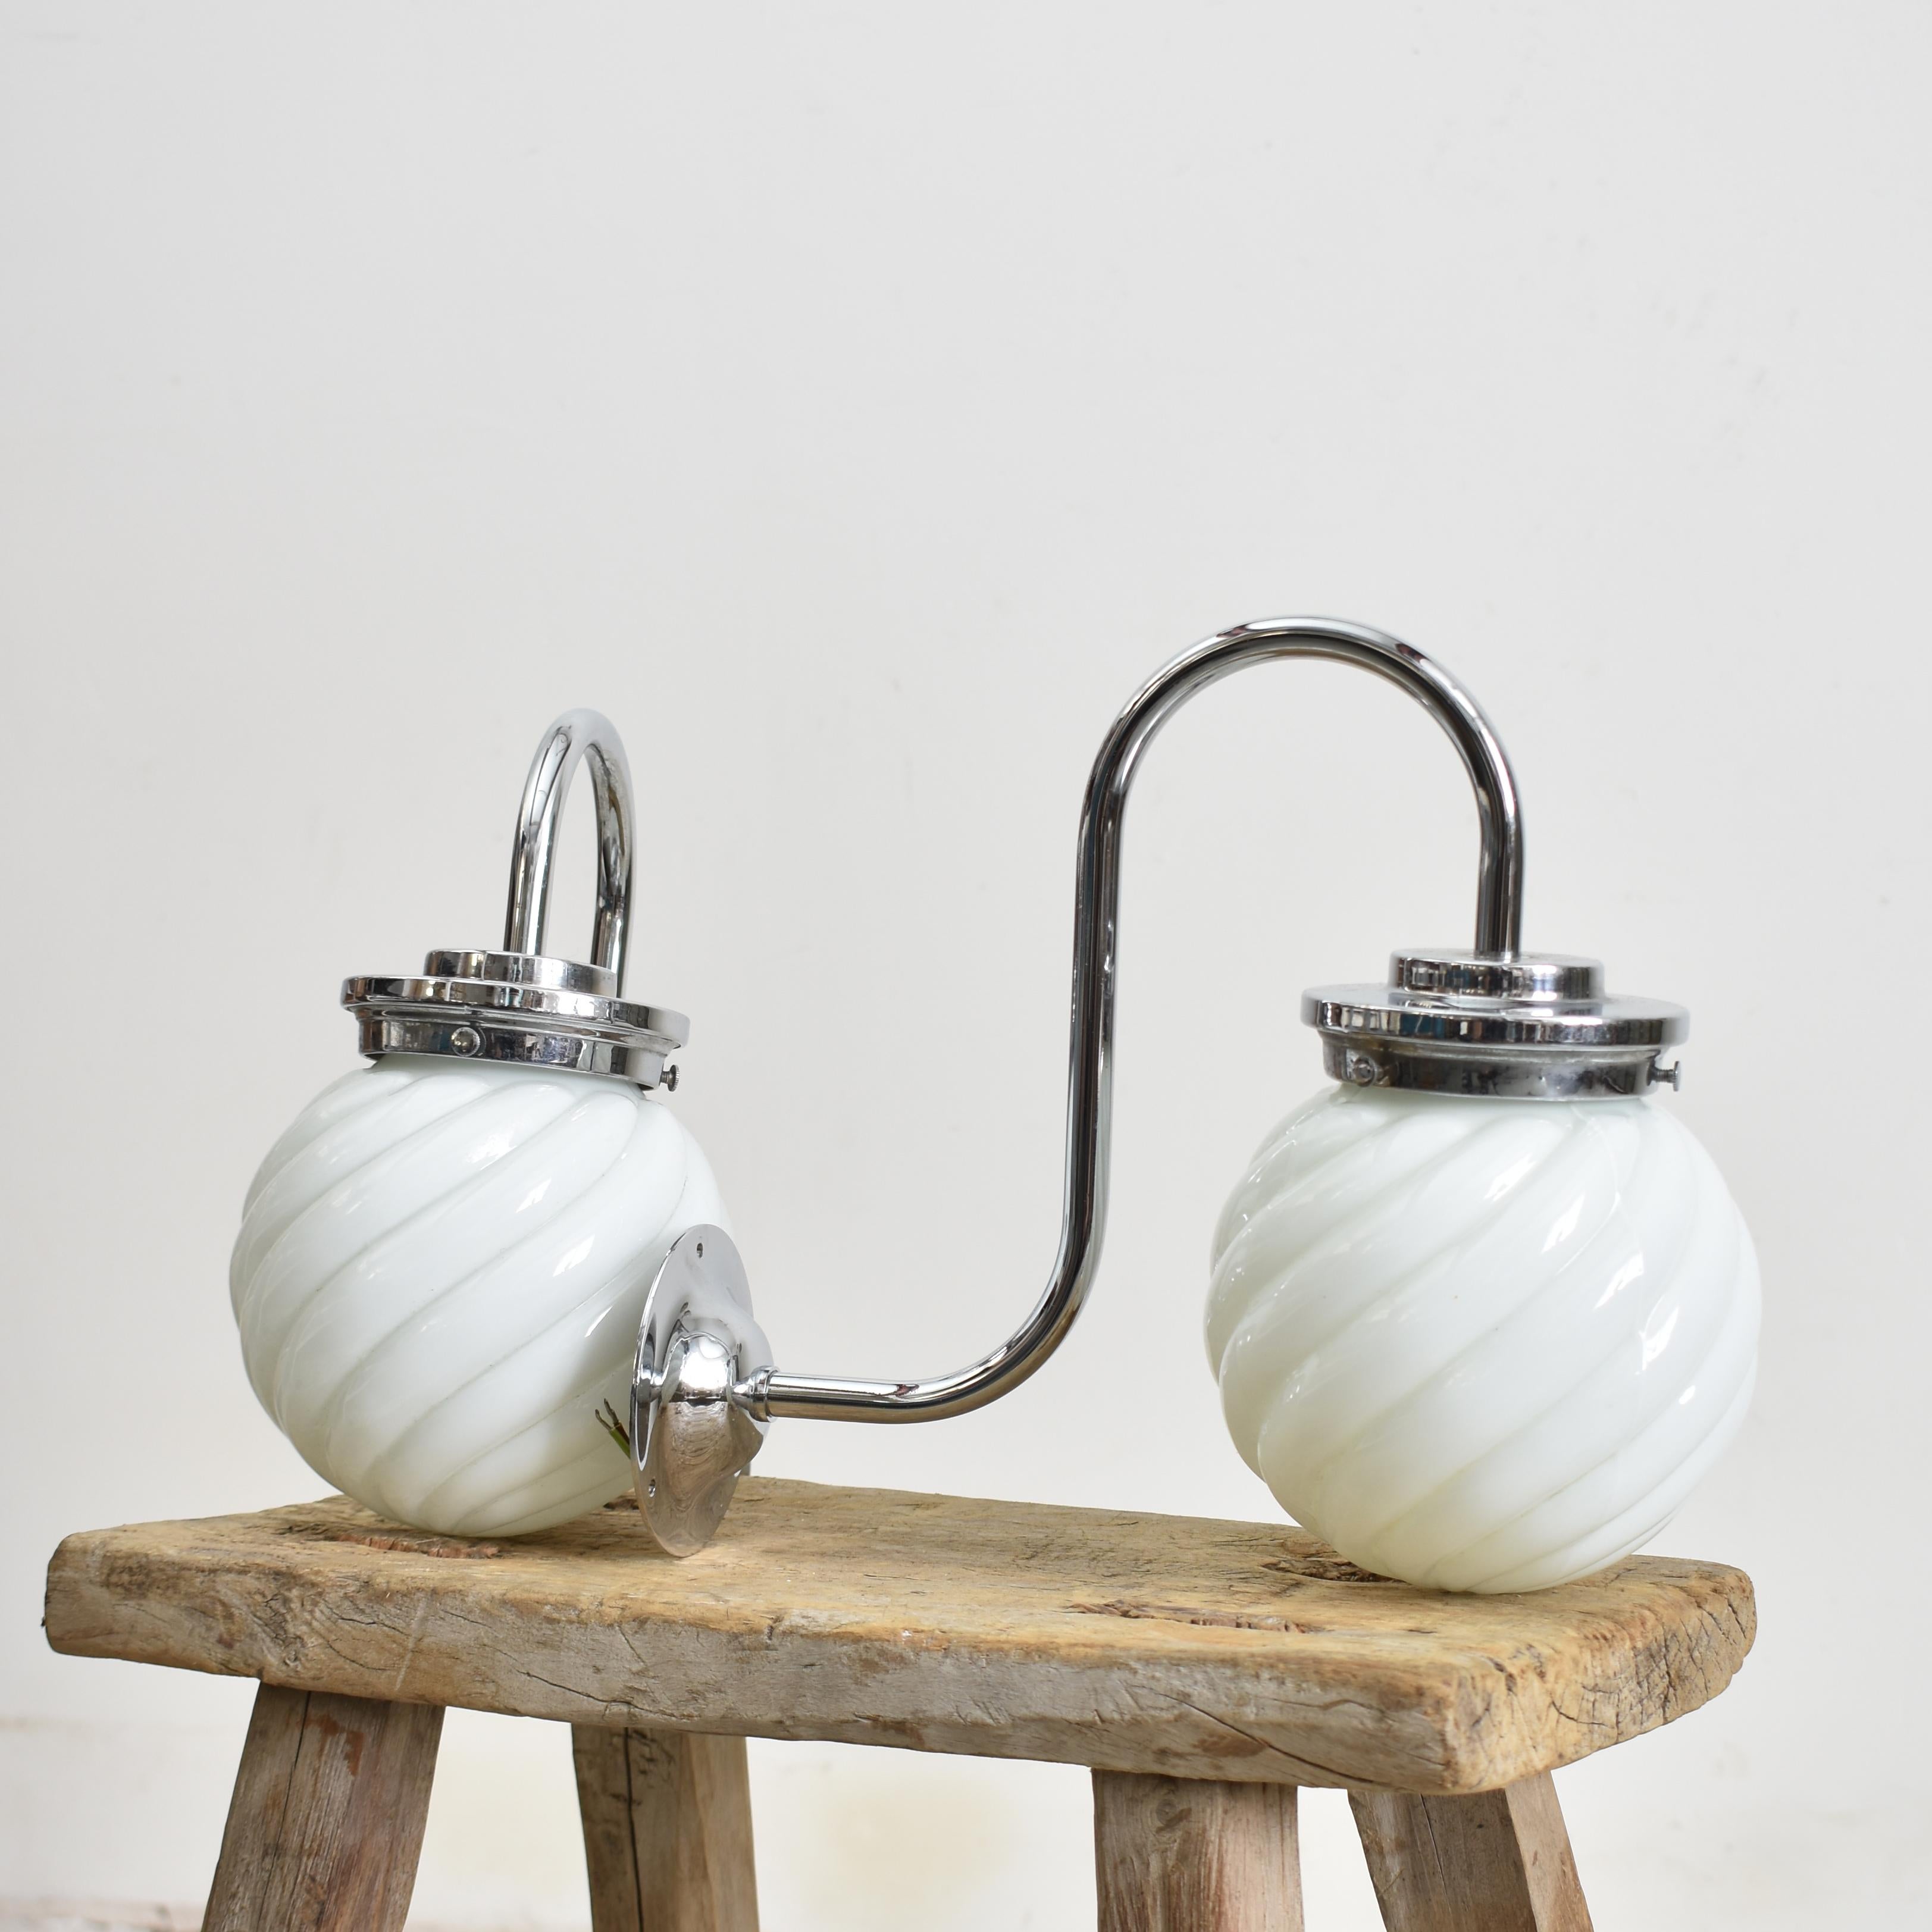 Pair of Antique Art Deco Opaline Wall Lights In Good Condition For Sale In Stockbridge, GB